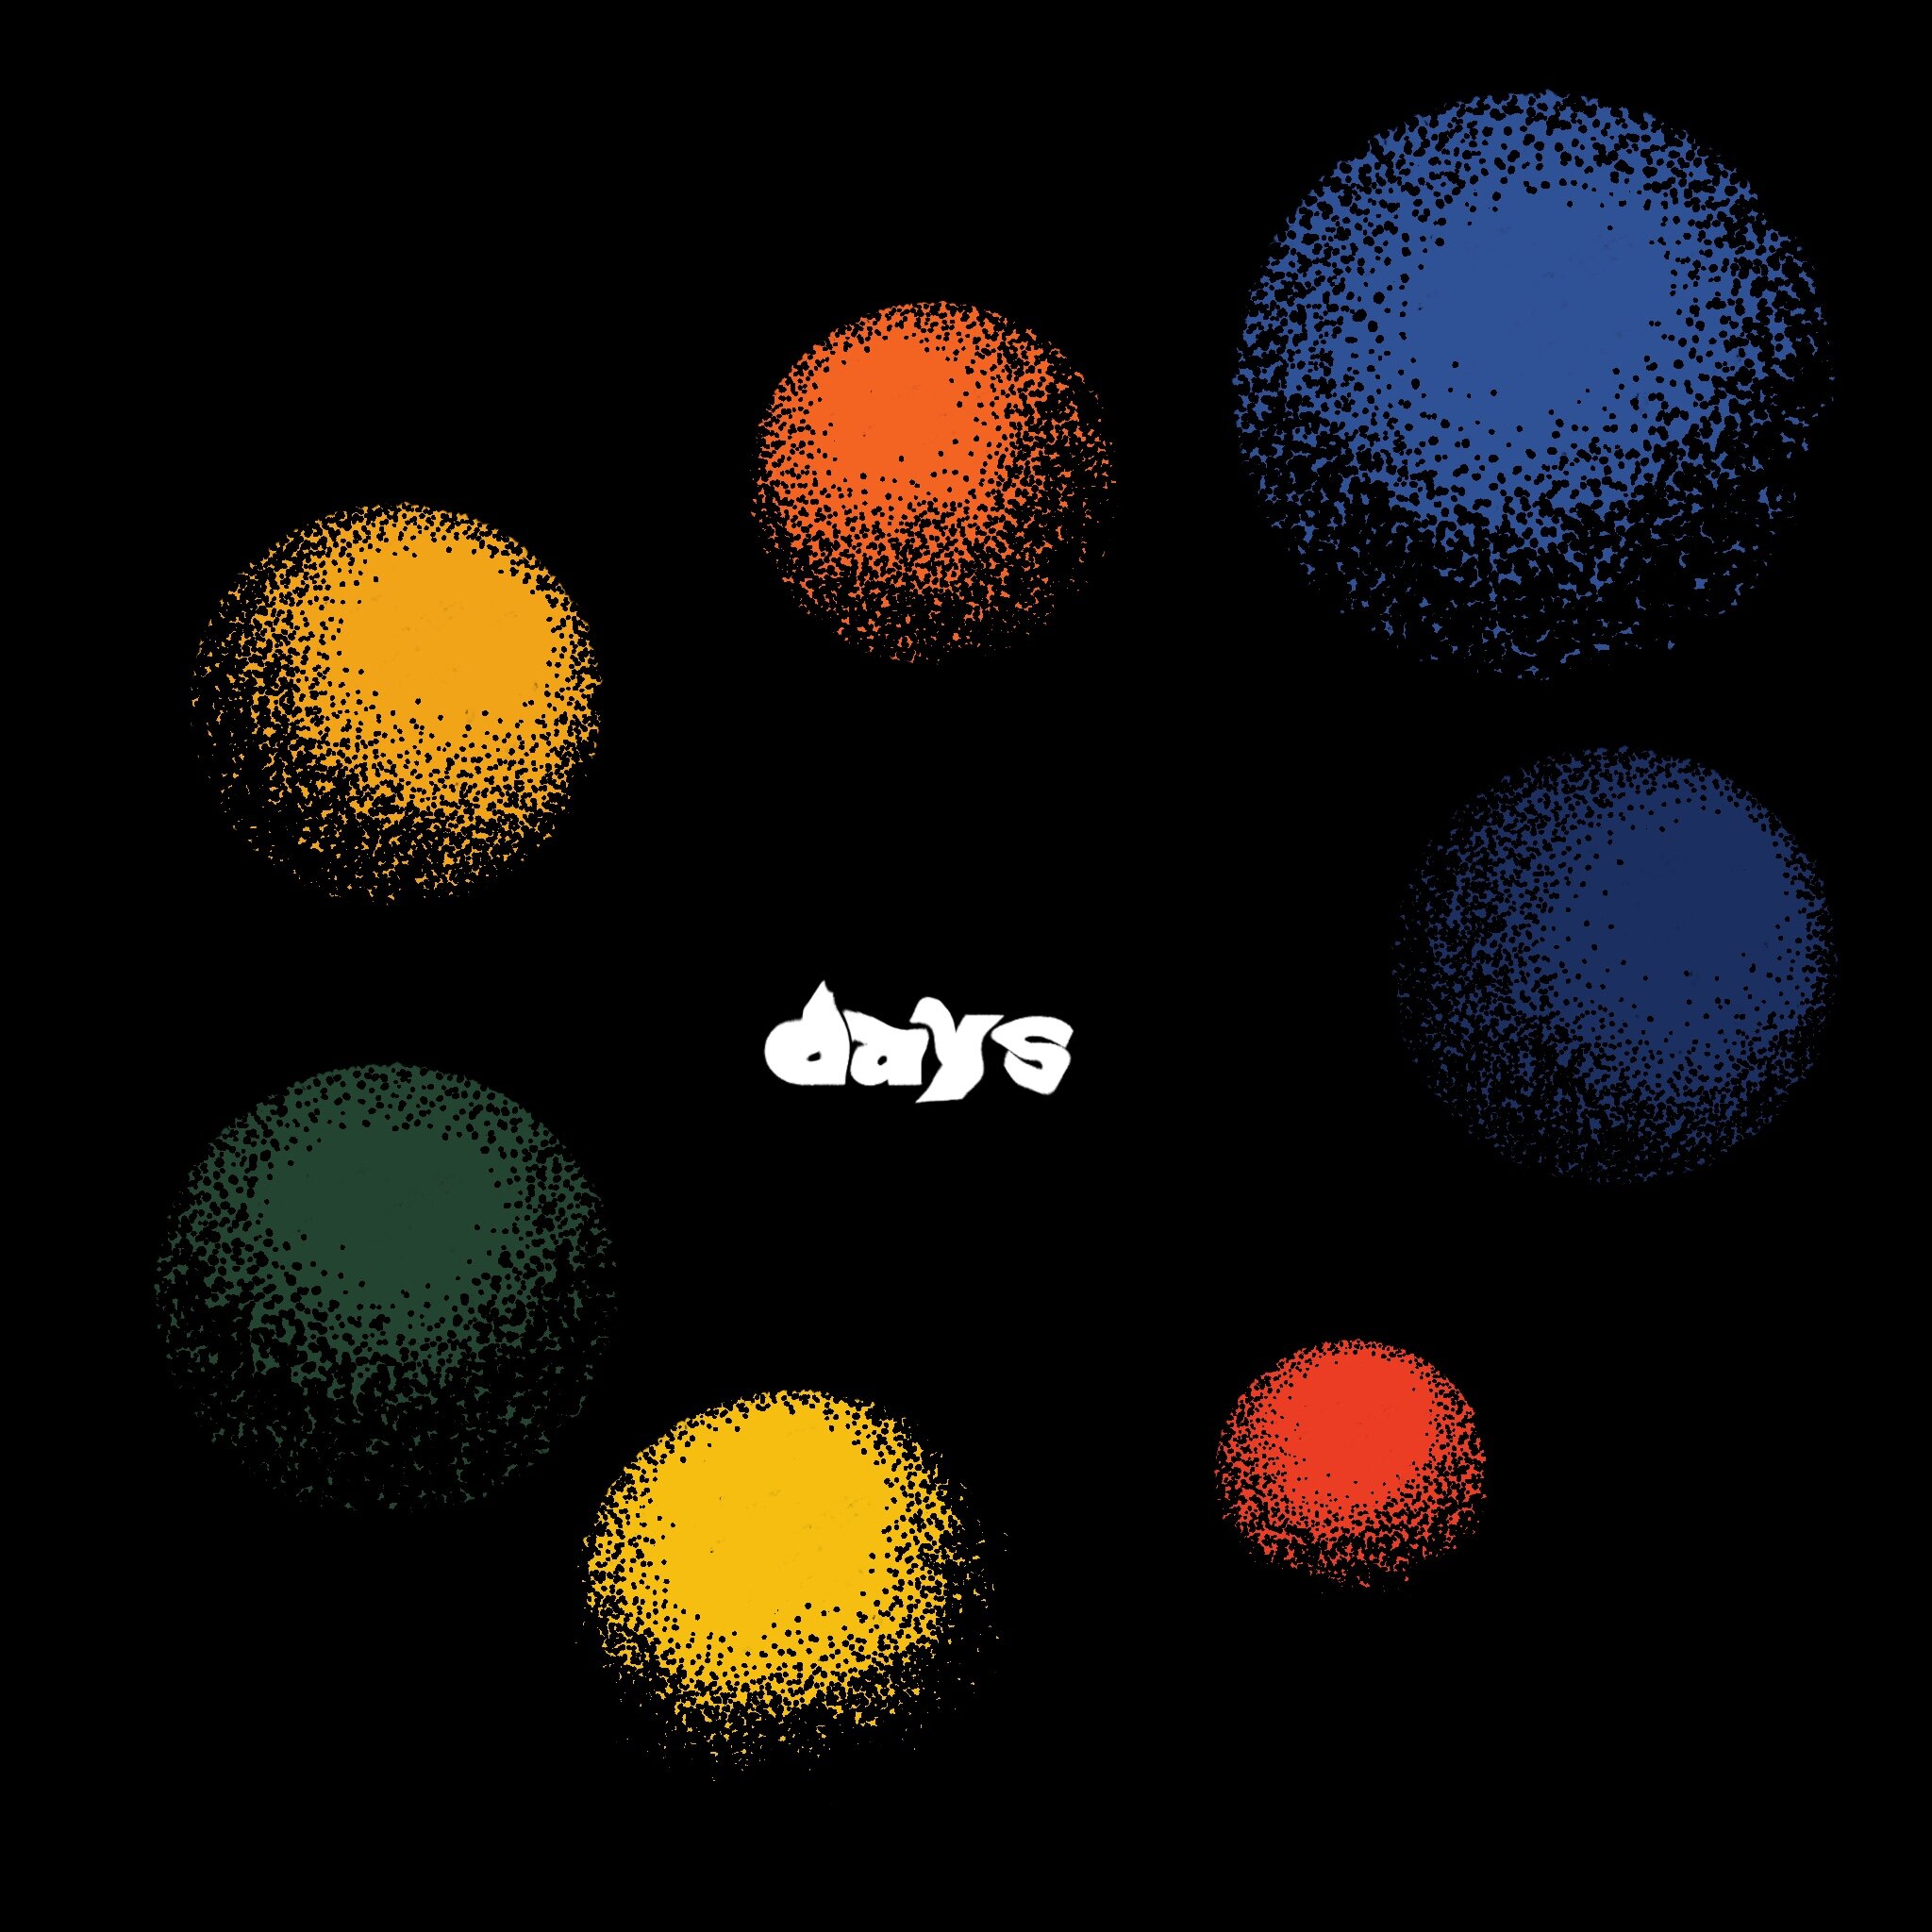 DAYS (&amp; confused)